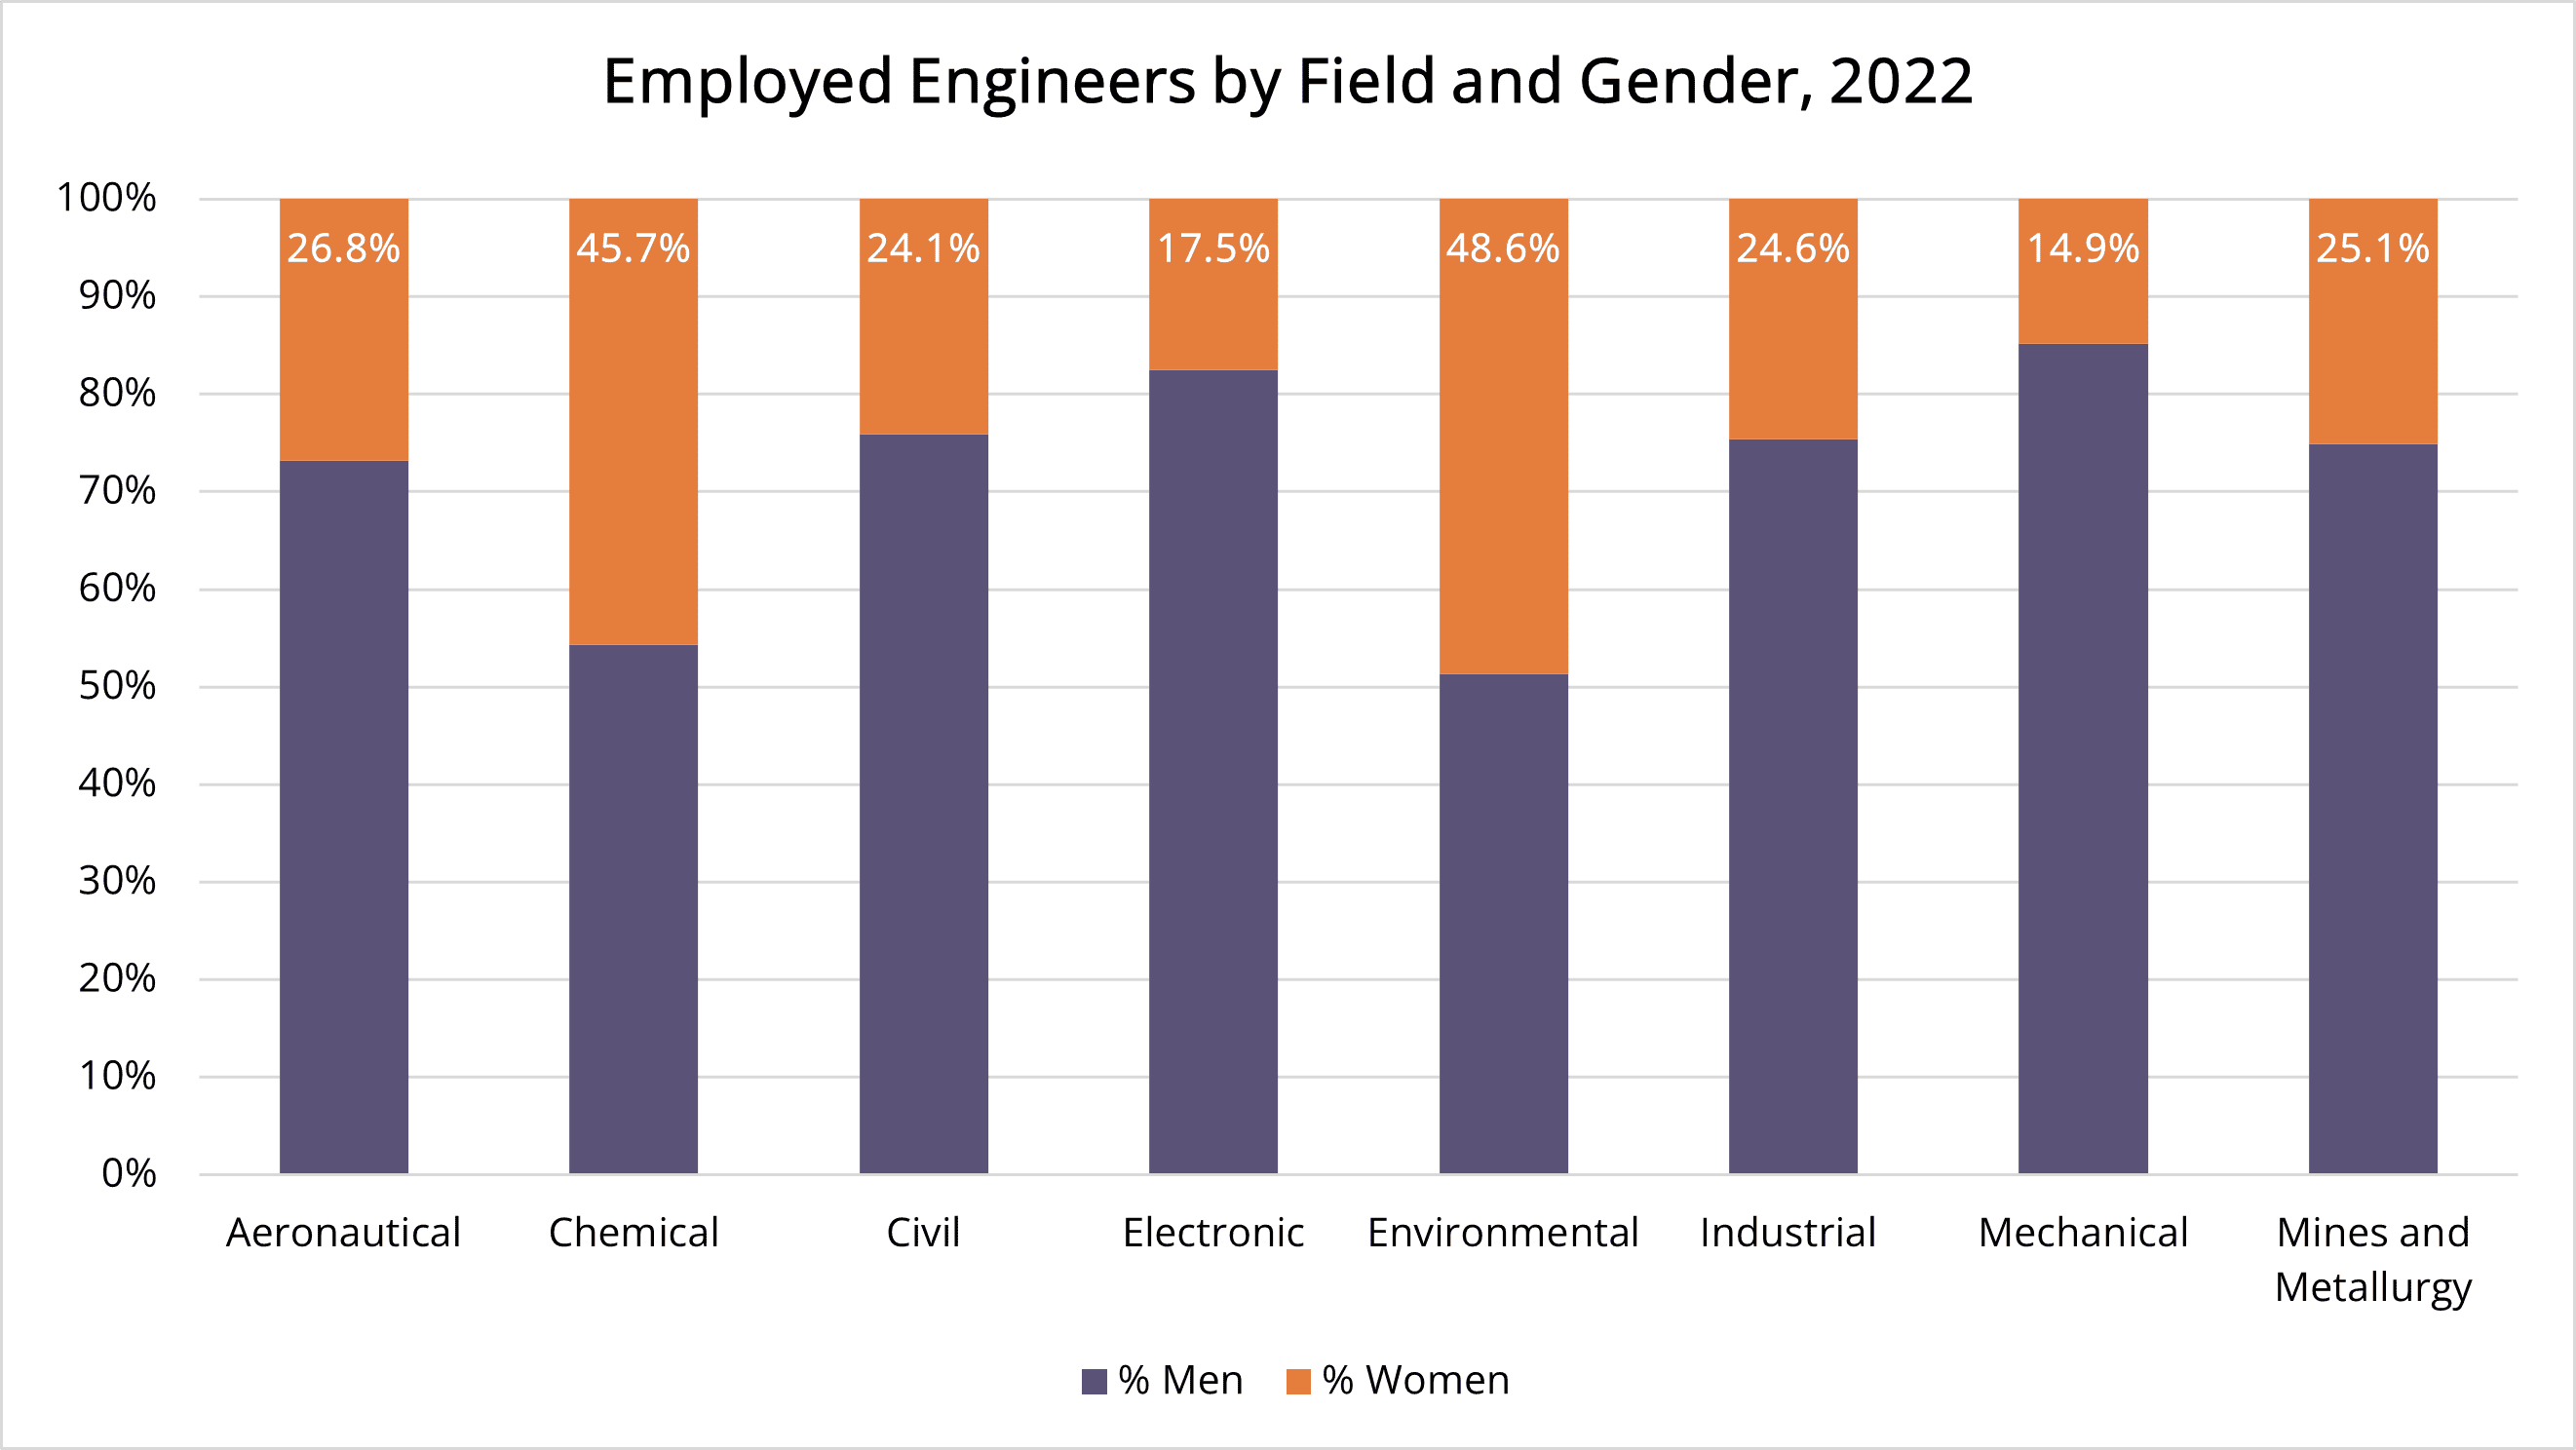 Bar graph showing engineering employment in Spain by field and gender